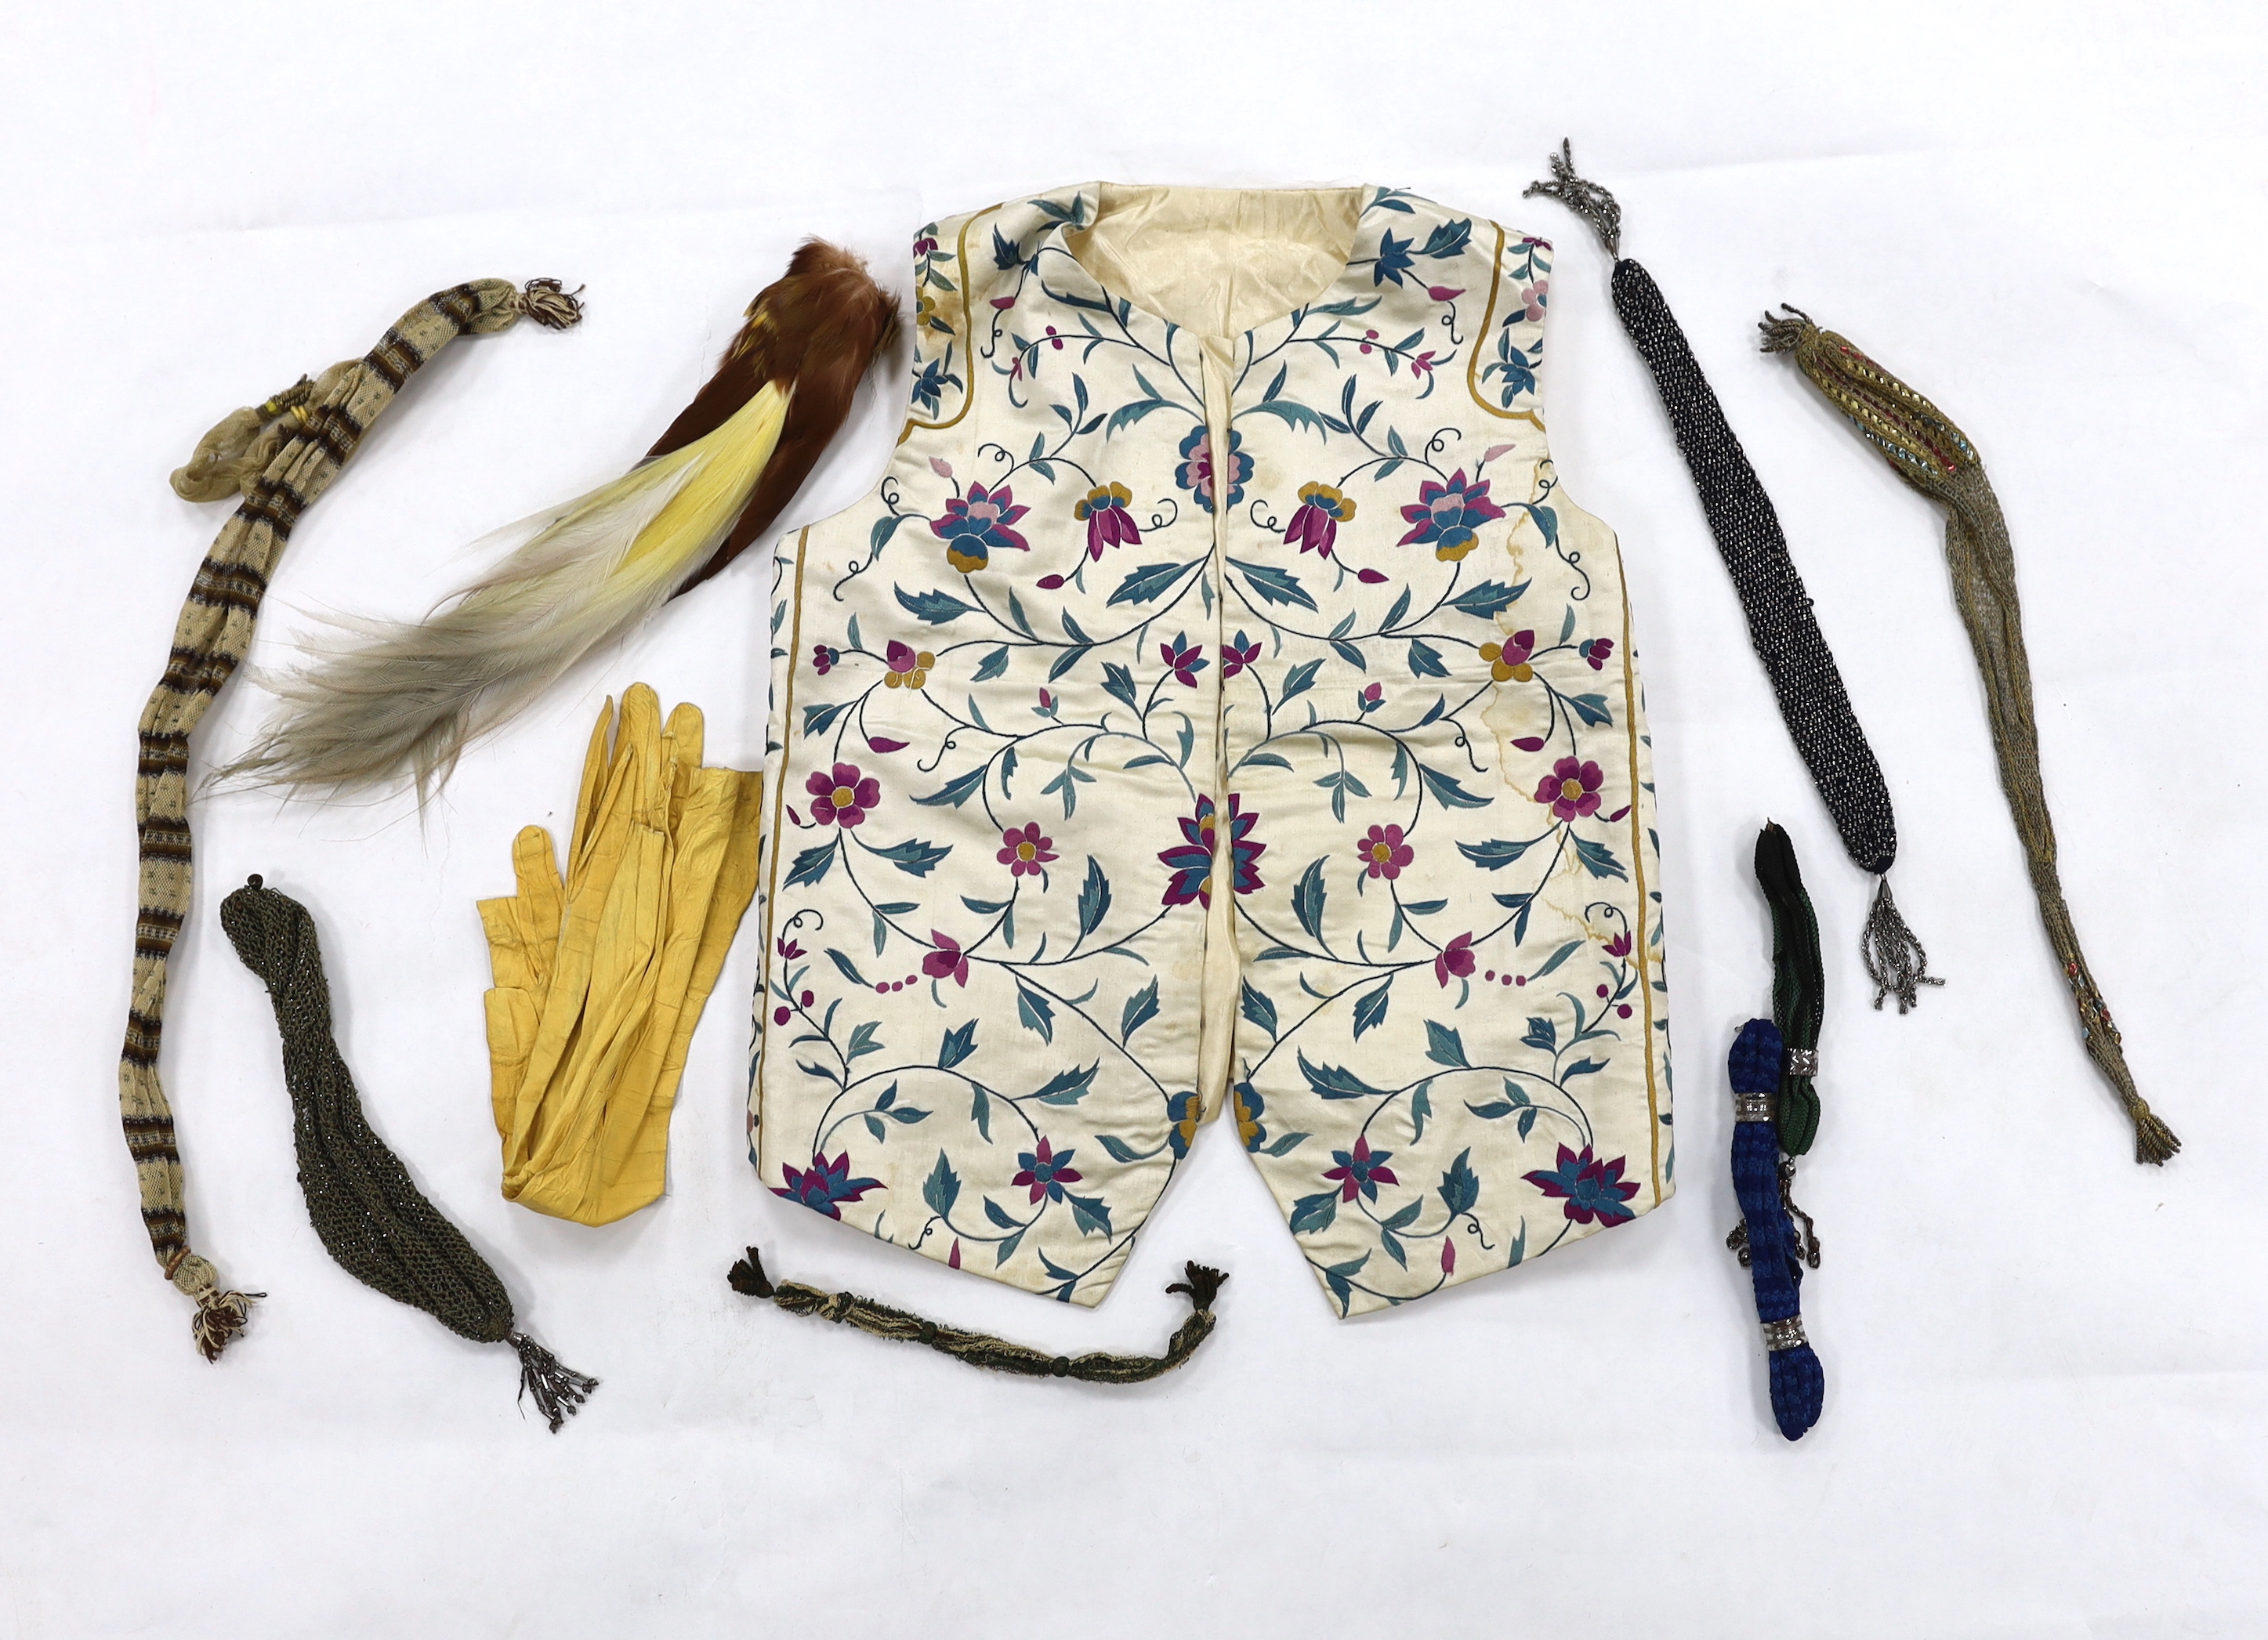 A collection of eight late 18th / early 19th century cut steel and other misers purses, a pair of yellow Regency ladies long shami leather gloves, an exotic feather hat ornament and a Chinese embroidered young boys waist